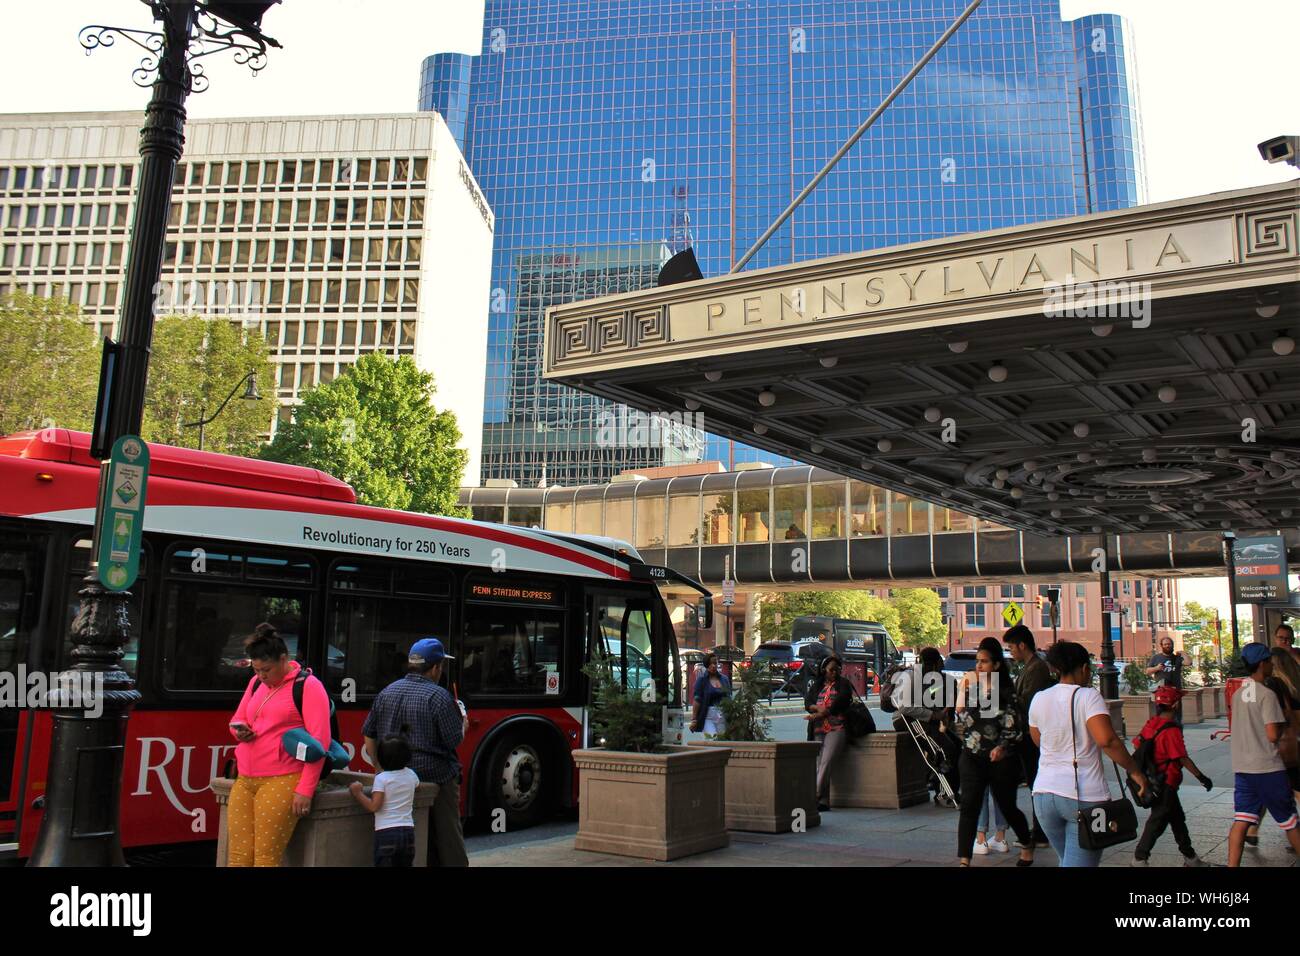 Newark, New Jersey - August 15th 2019: Authentic street view of the pedestrian entrance to the busy Pennsylvania rail and bus station, in Newark NJ. Stock Photo